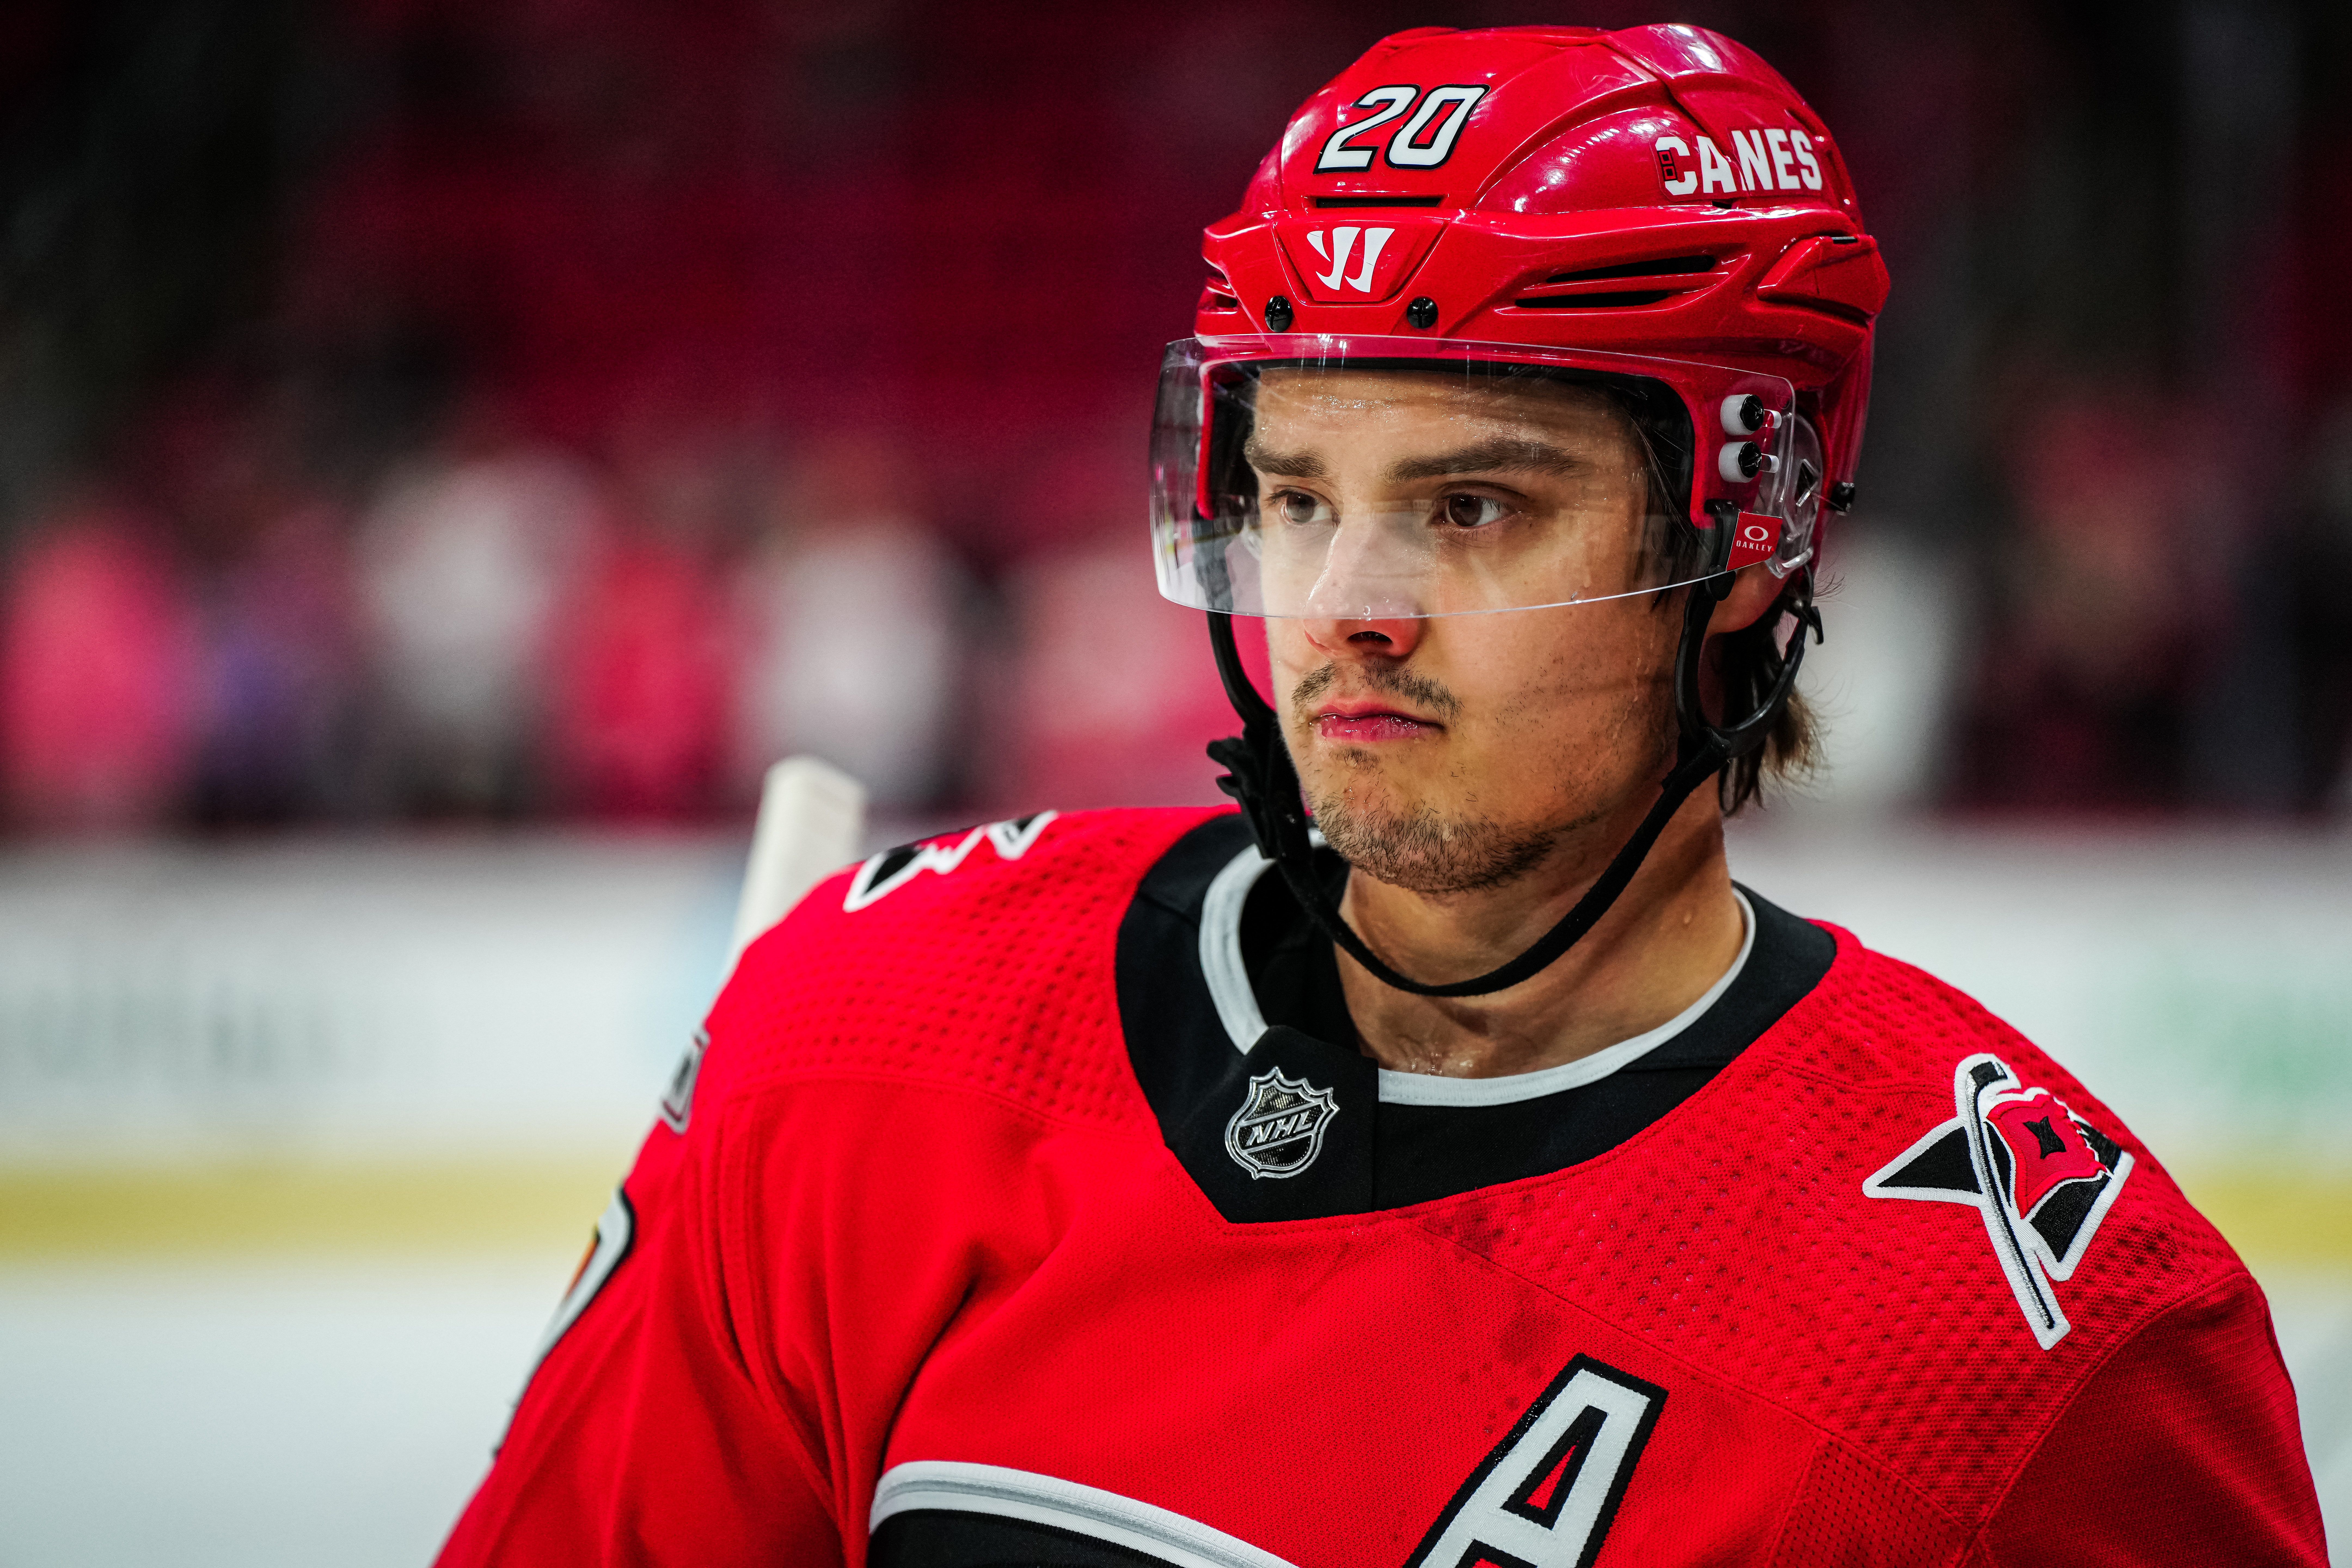 Sebastian Aho #20 of the Carolina Hurricanes warms up prior to a game against the Detroit Red Wings at PNC Arena on April 11, 2023 in Raleigh, North Carolina.